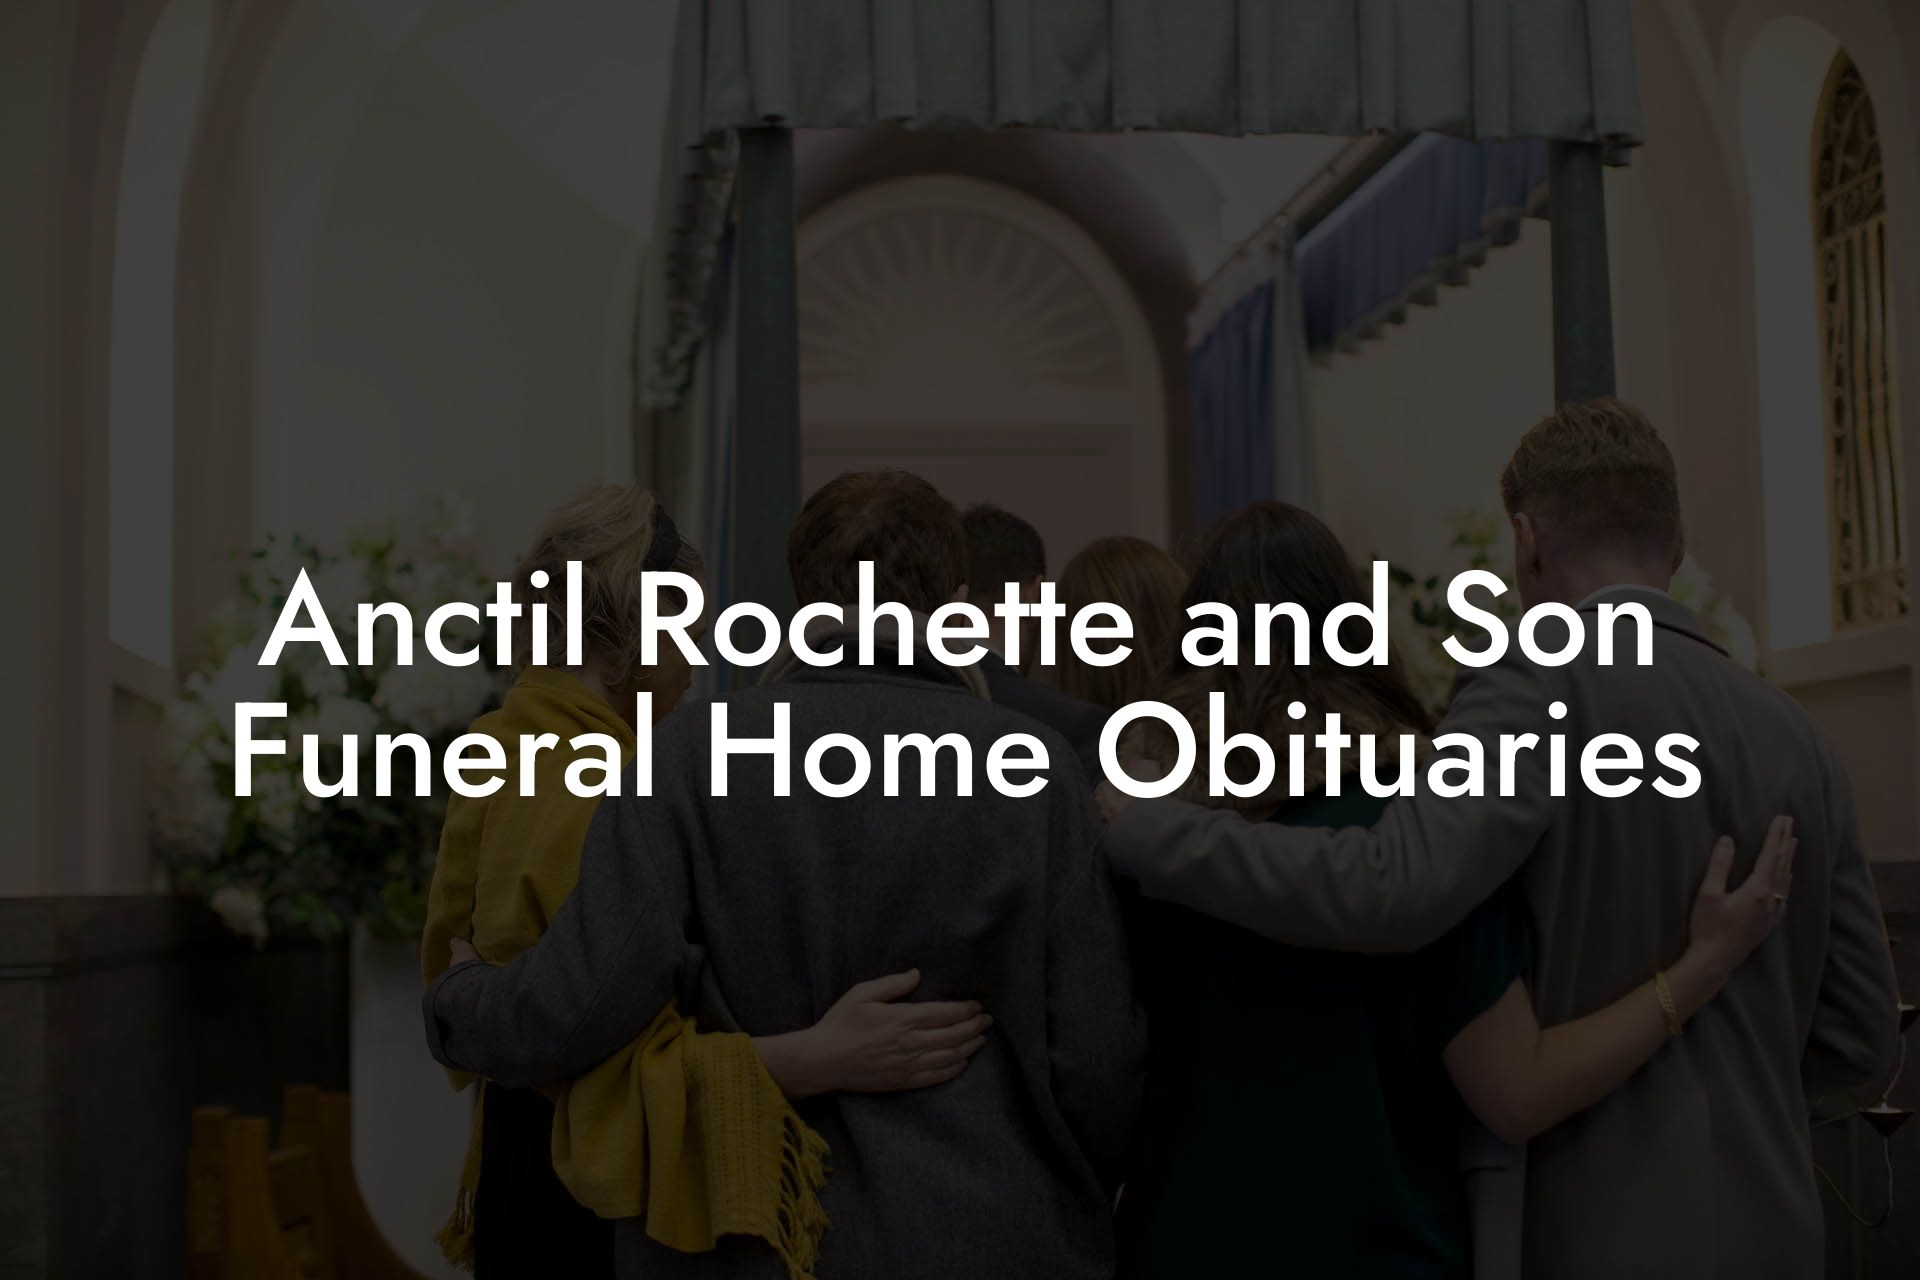 Anctil Rochette and Son Funeral Home Obituaries